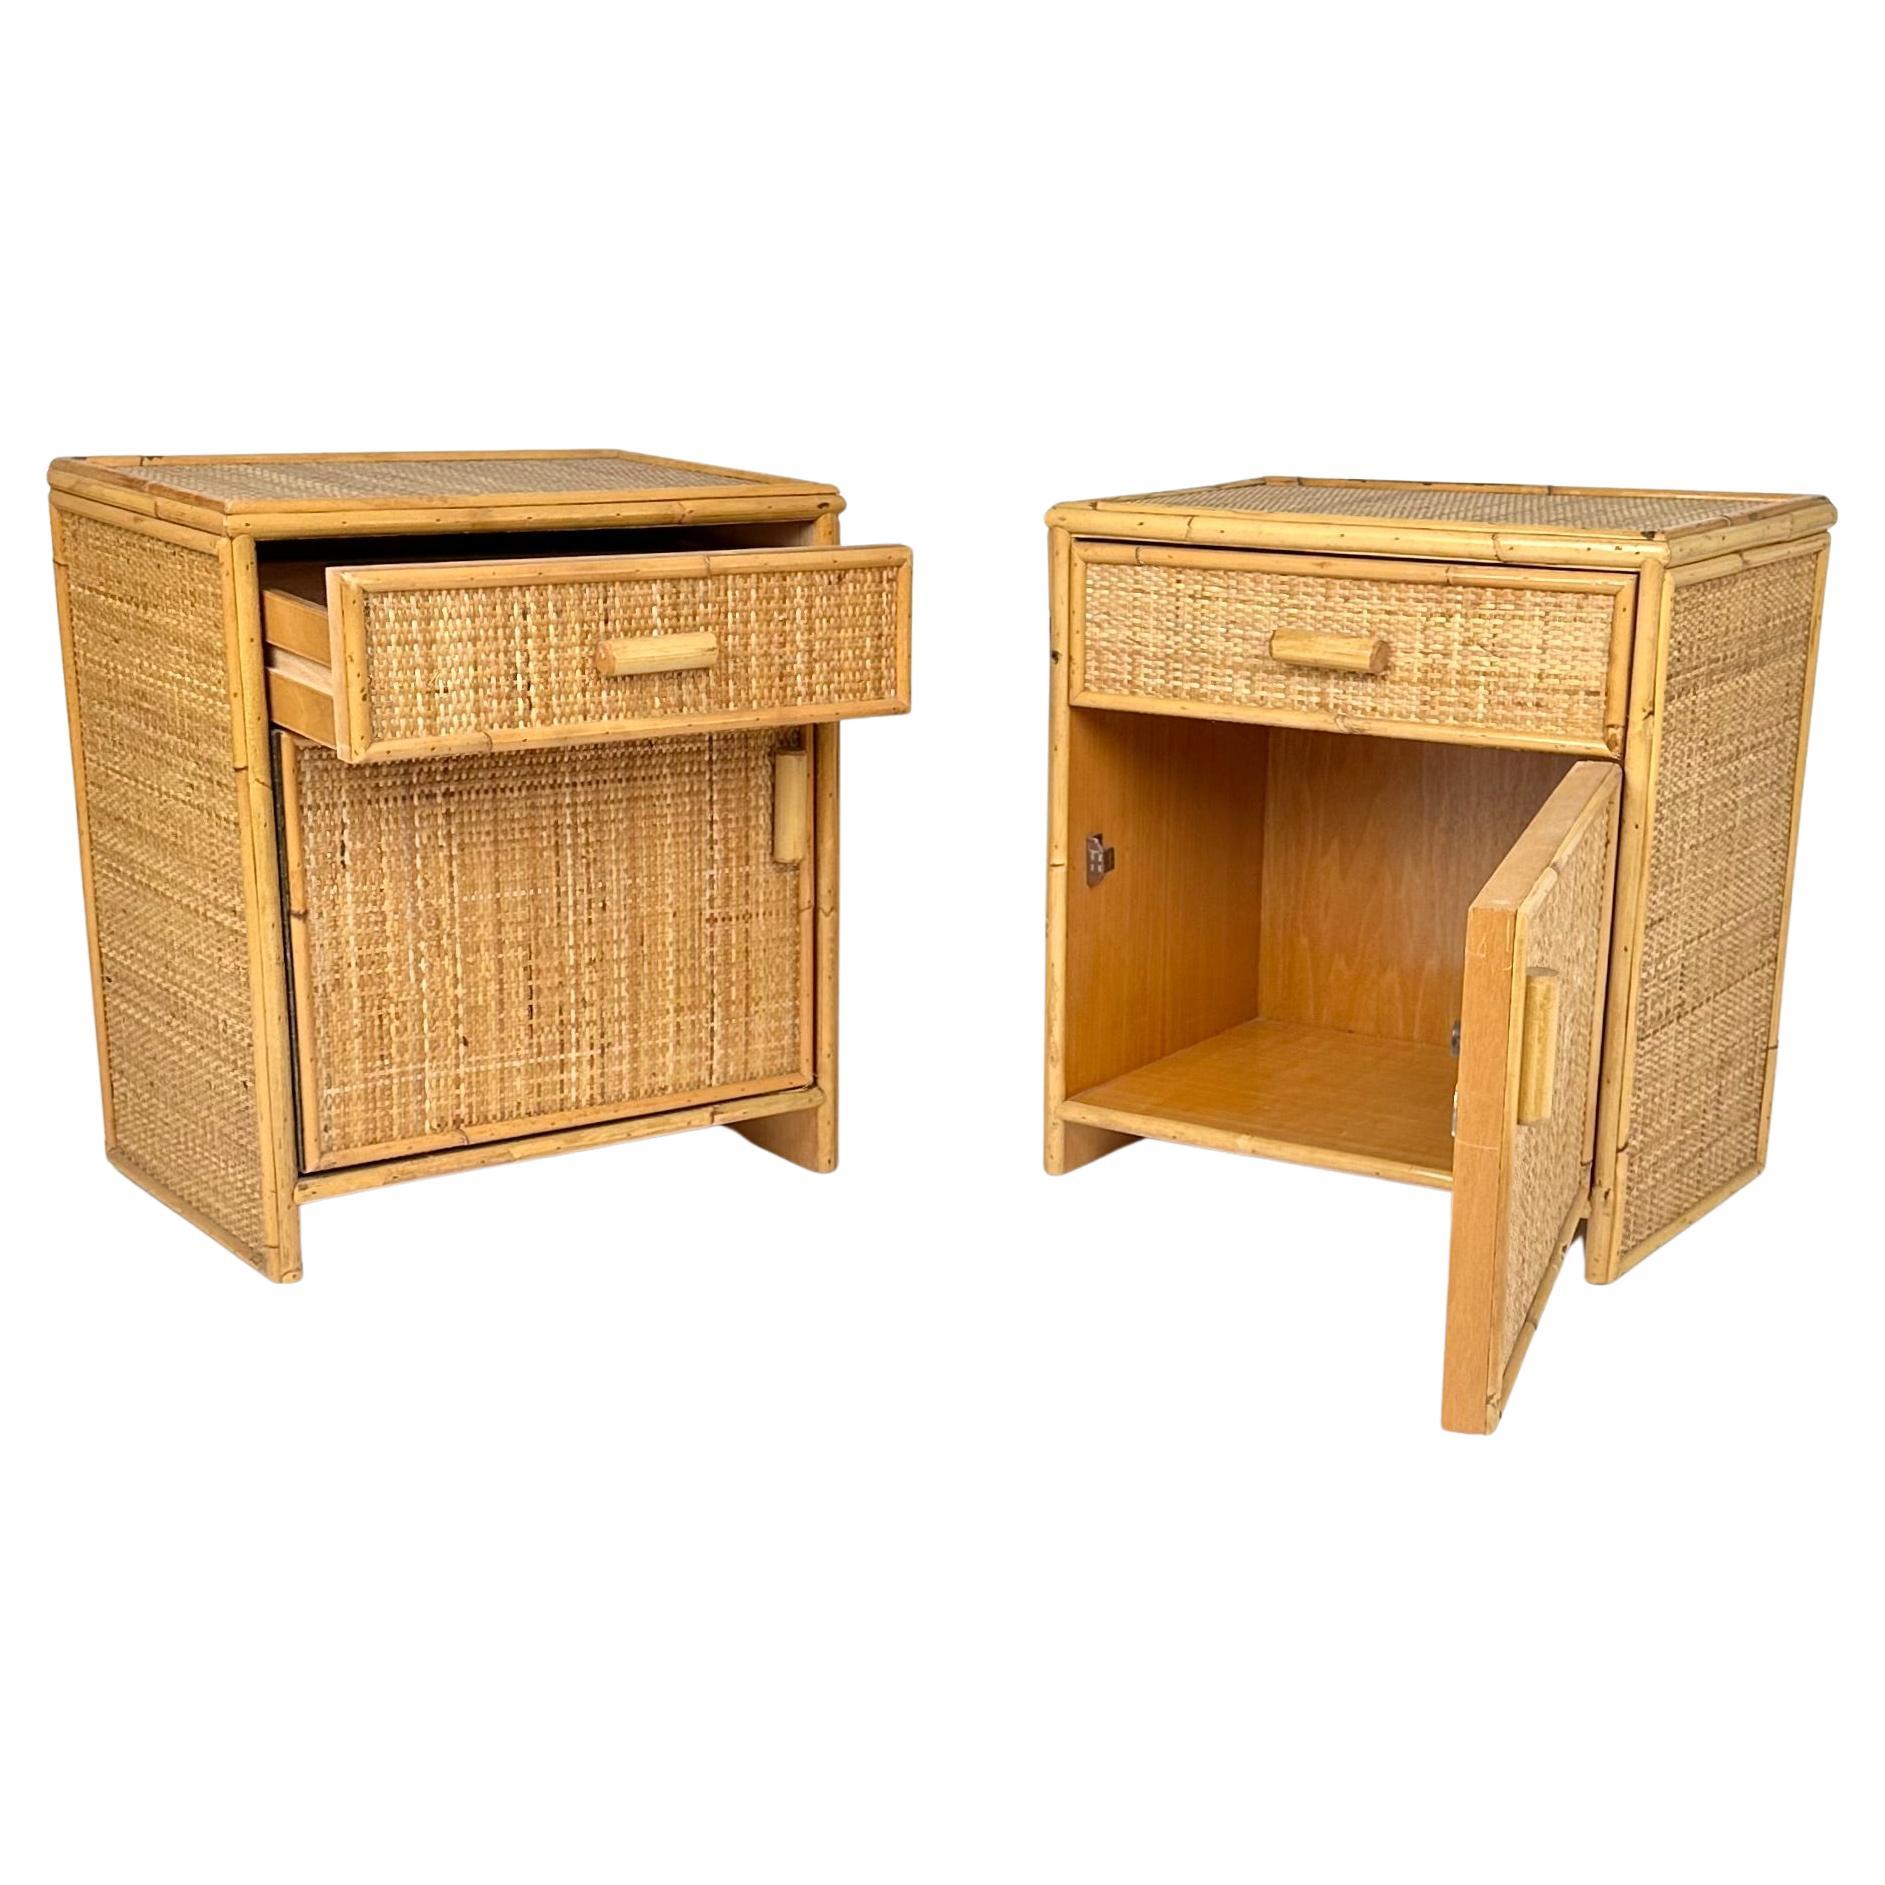 Midcentury Pair of Bedside Tables Nightstands in Bamboo & Rattan, Italy 1970s In Good Condition For Sale In Rome, IT